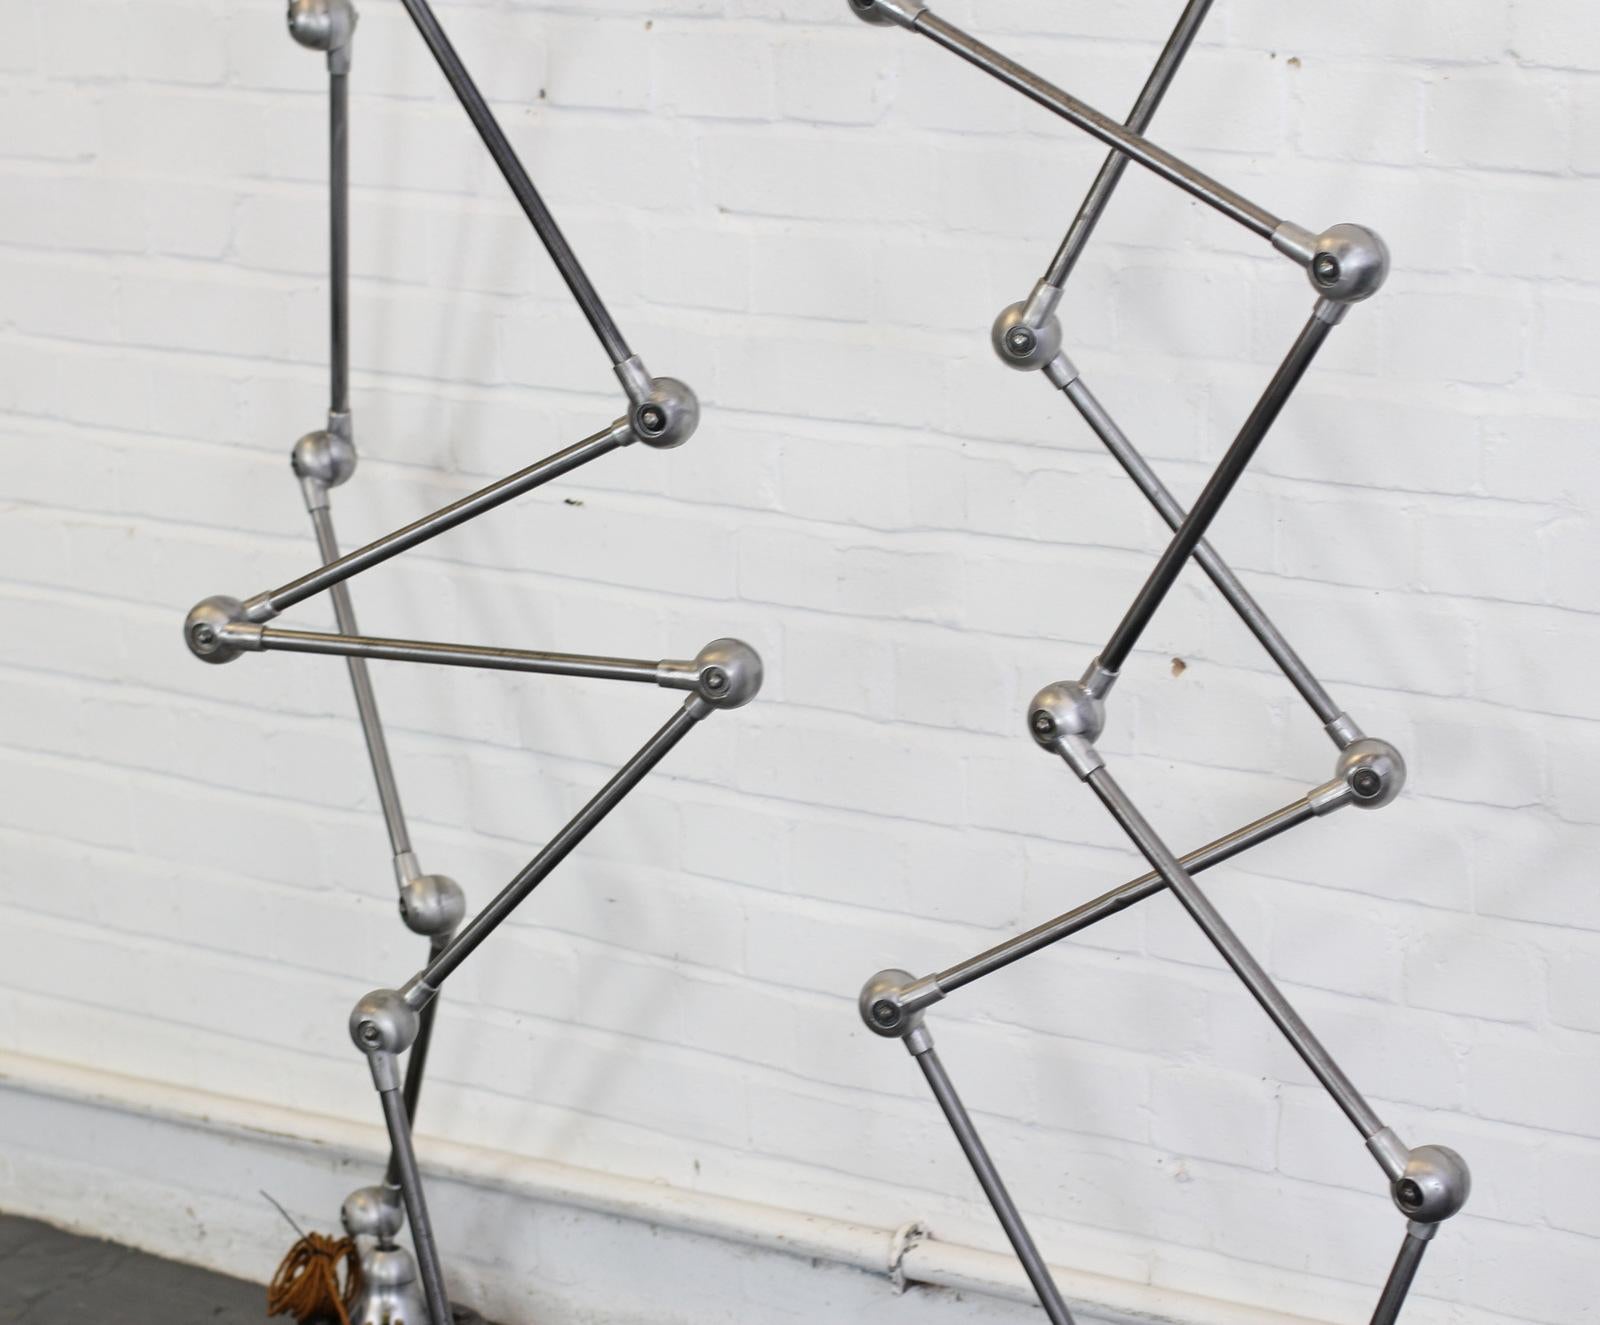 Floor standing Industrial lamps by Jean Louis Domecq, circa 1950s

- Price is per lamp (4 available)
- Brushed steel and aluminium
- Original makers badge
- 5 articulated arms
- Takes E27 fitting bulbs
- Original inline switch on the head
-